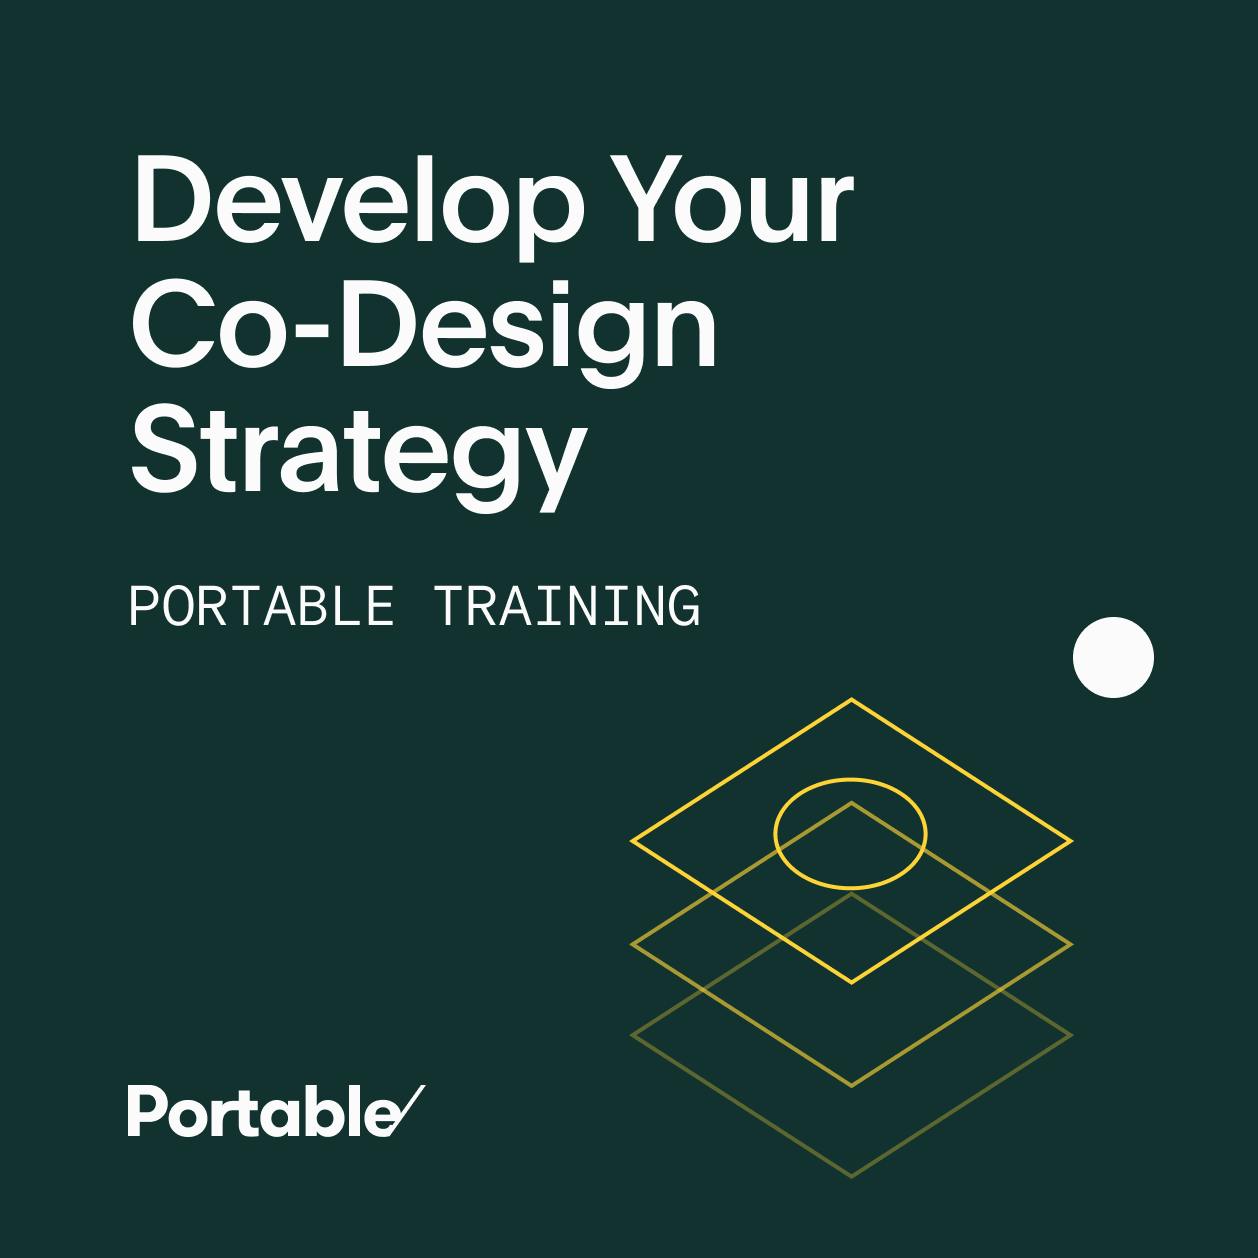 Develop your Co-Design Strategy